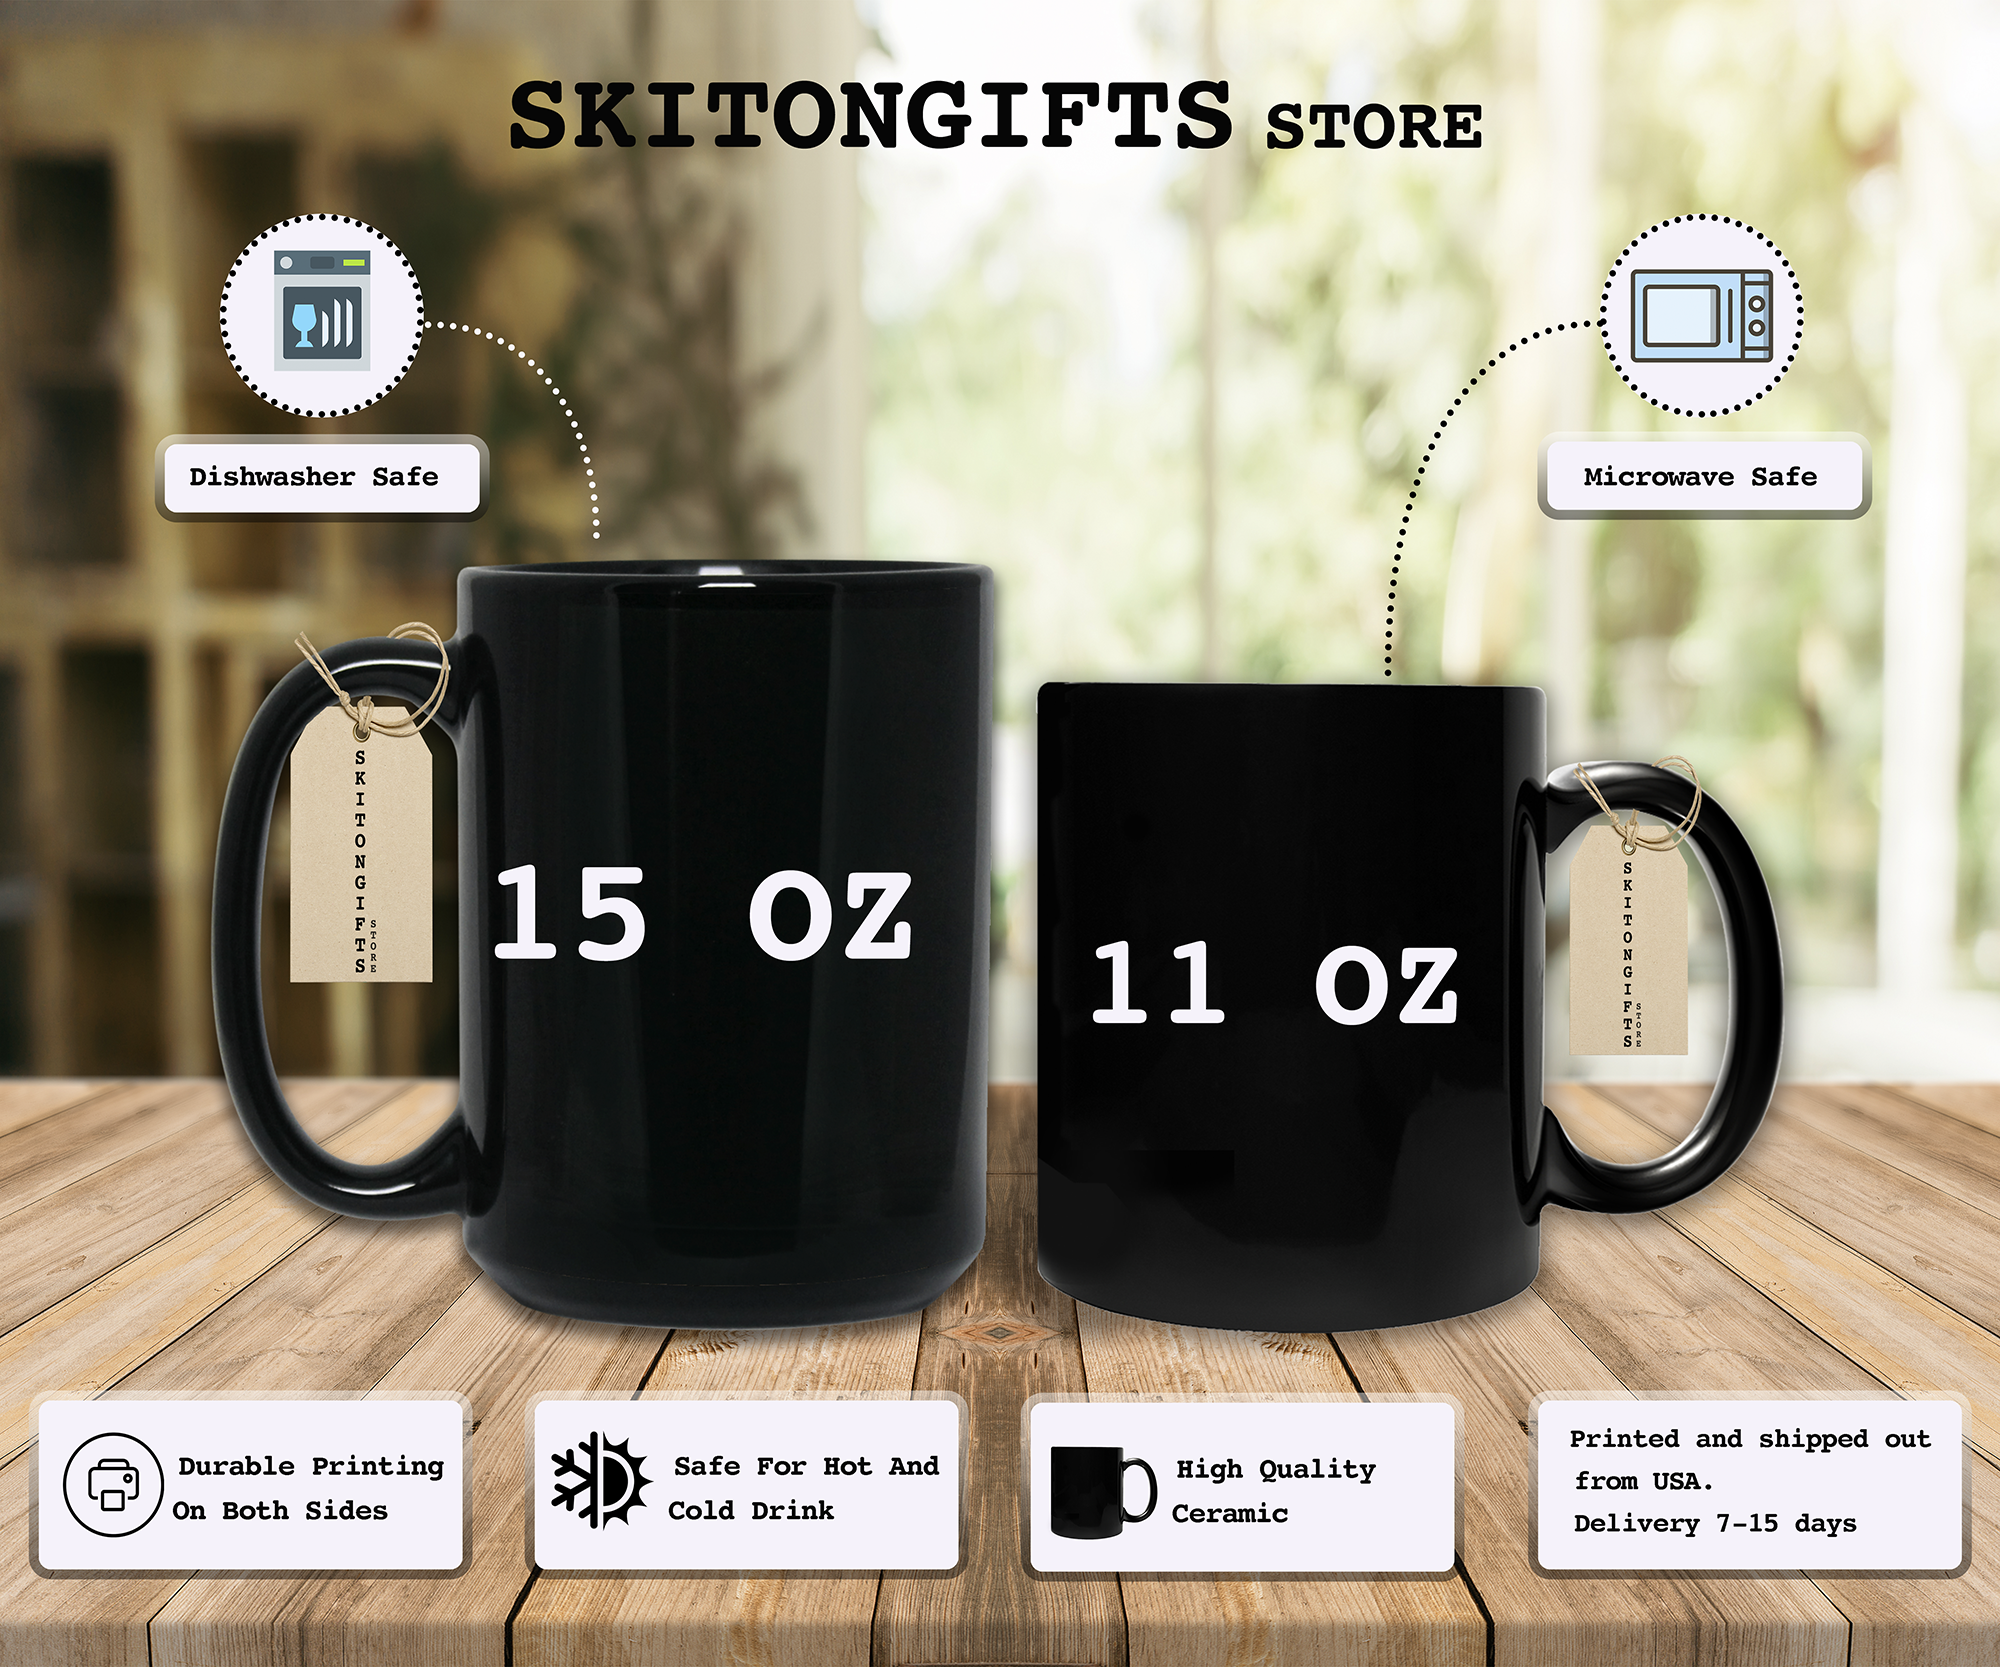 Skitongifts Coffee Mug Funny Ceramic Novelty M86-NH251221-Life Without God Is Like An Unsharpened Pencil Oqptzo7